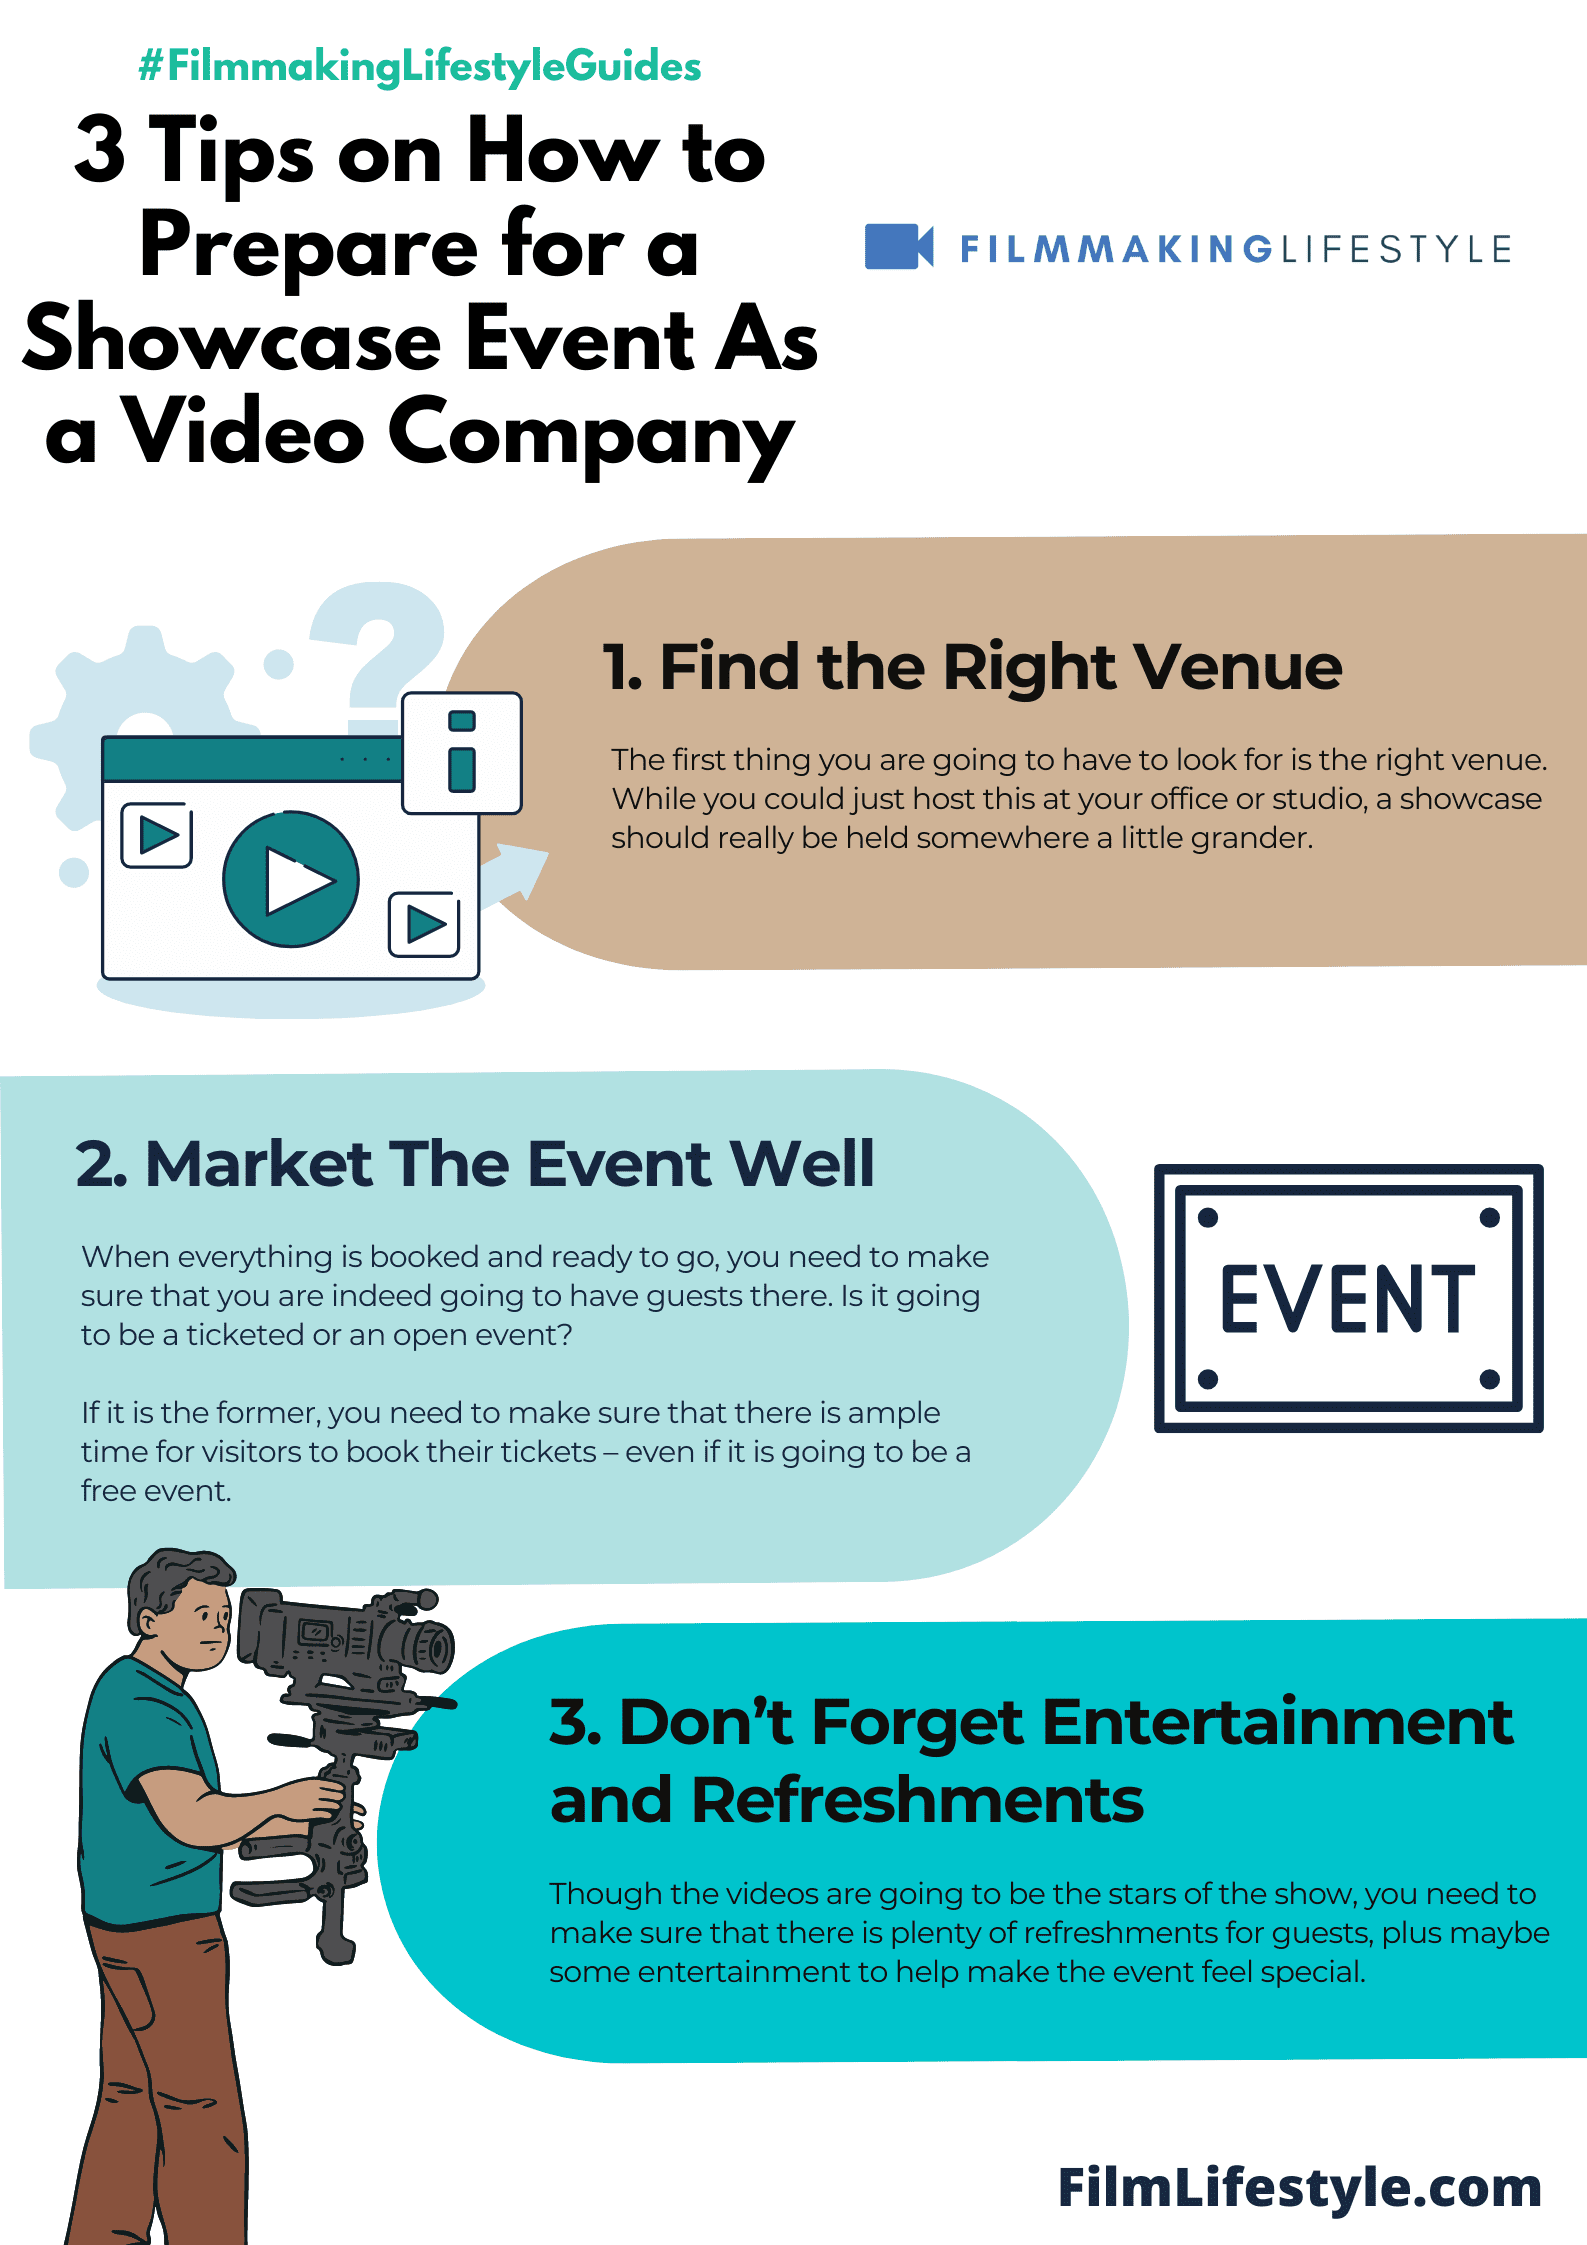 How to Prepare for a Showcase Event As a Video Company